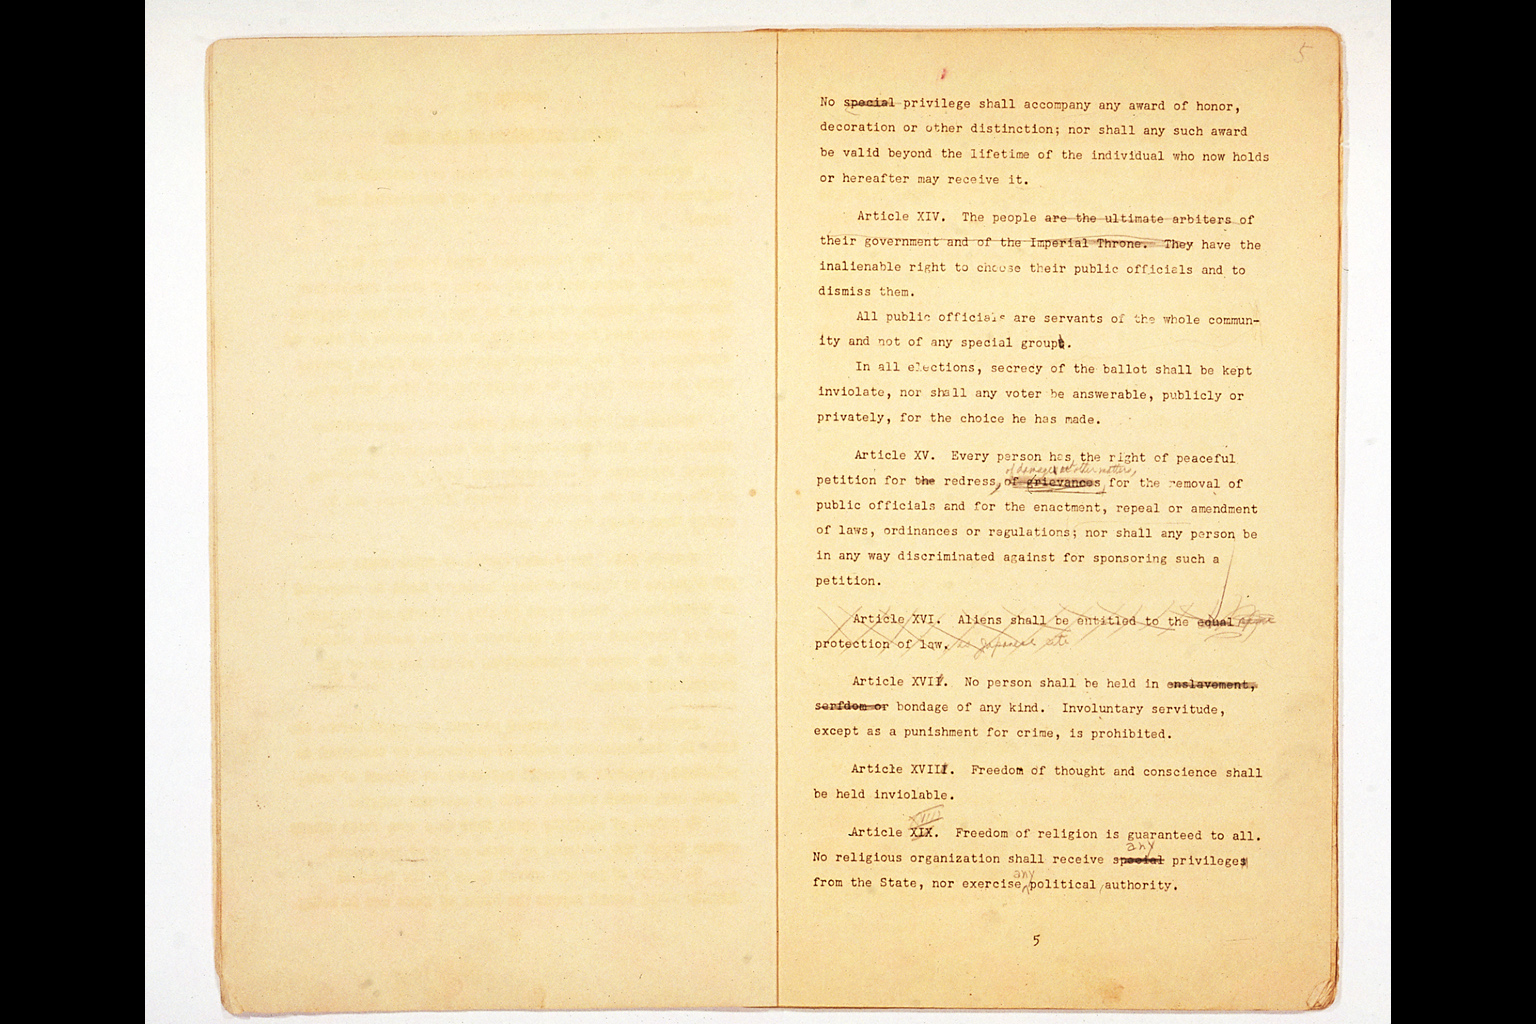 Constitution of Japan (GHQ Draft)(larger)